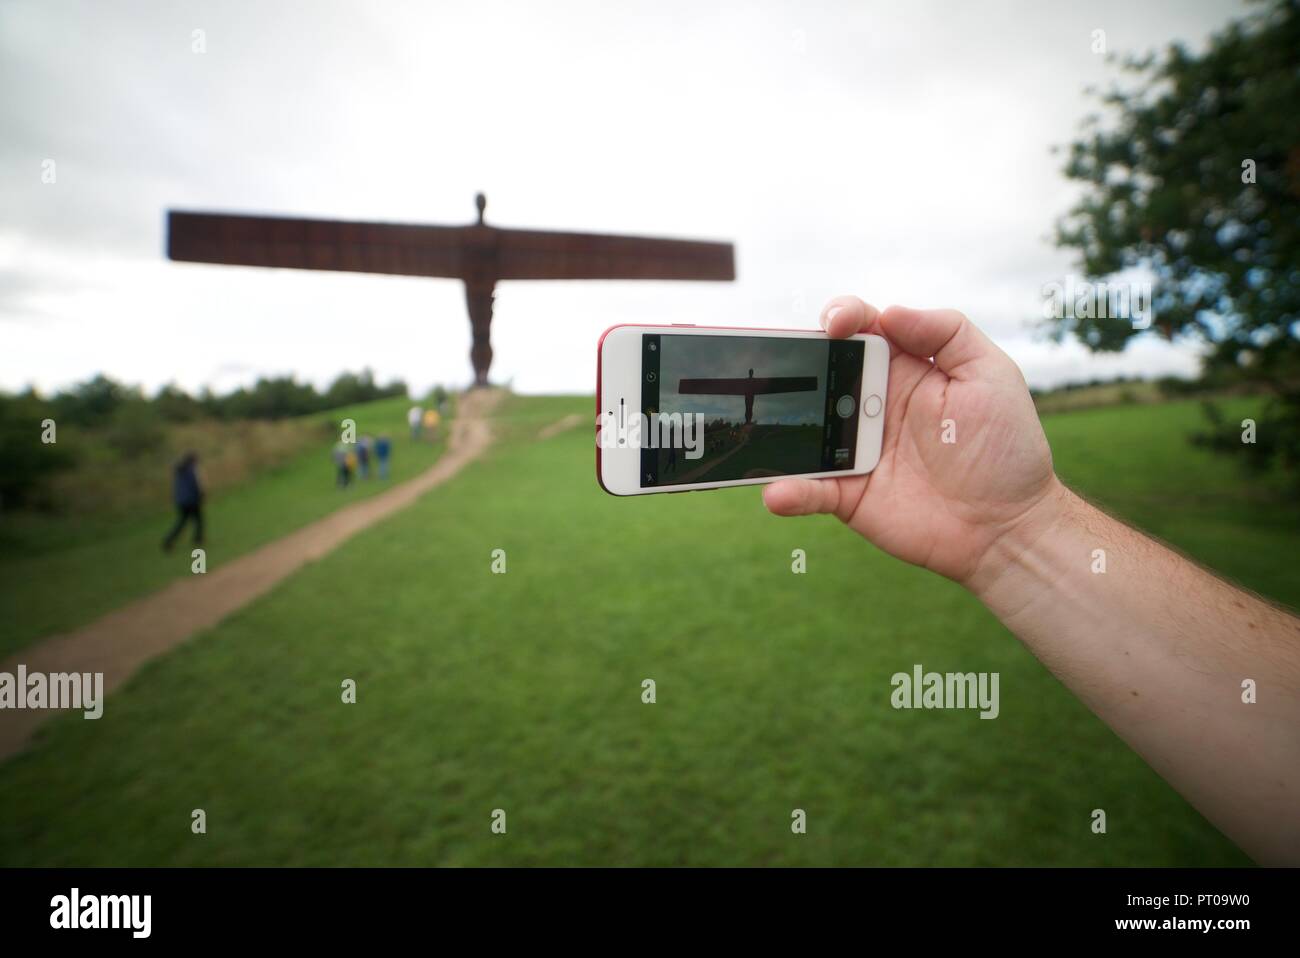 Tourist taking a photo of the Angel of the North statue with their phone, a person photographing the Angel of the North sculpture in Tyne and Wear. Stock Photo